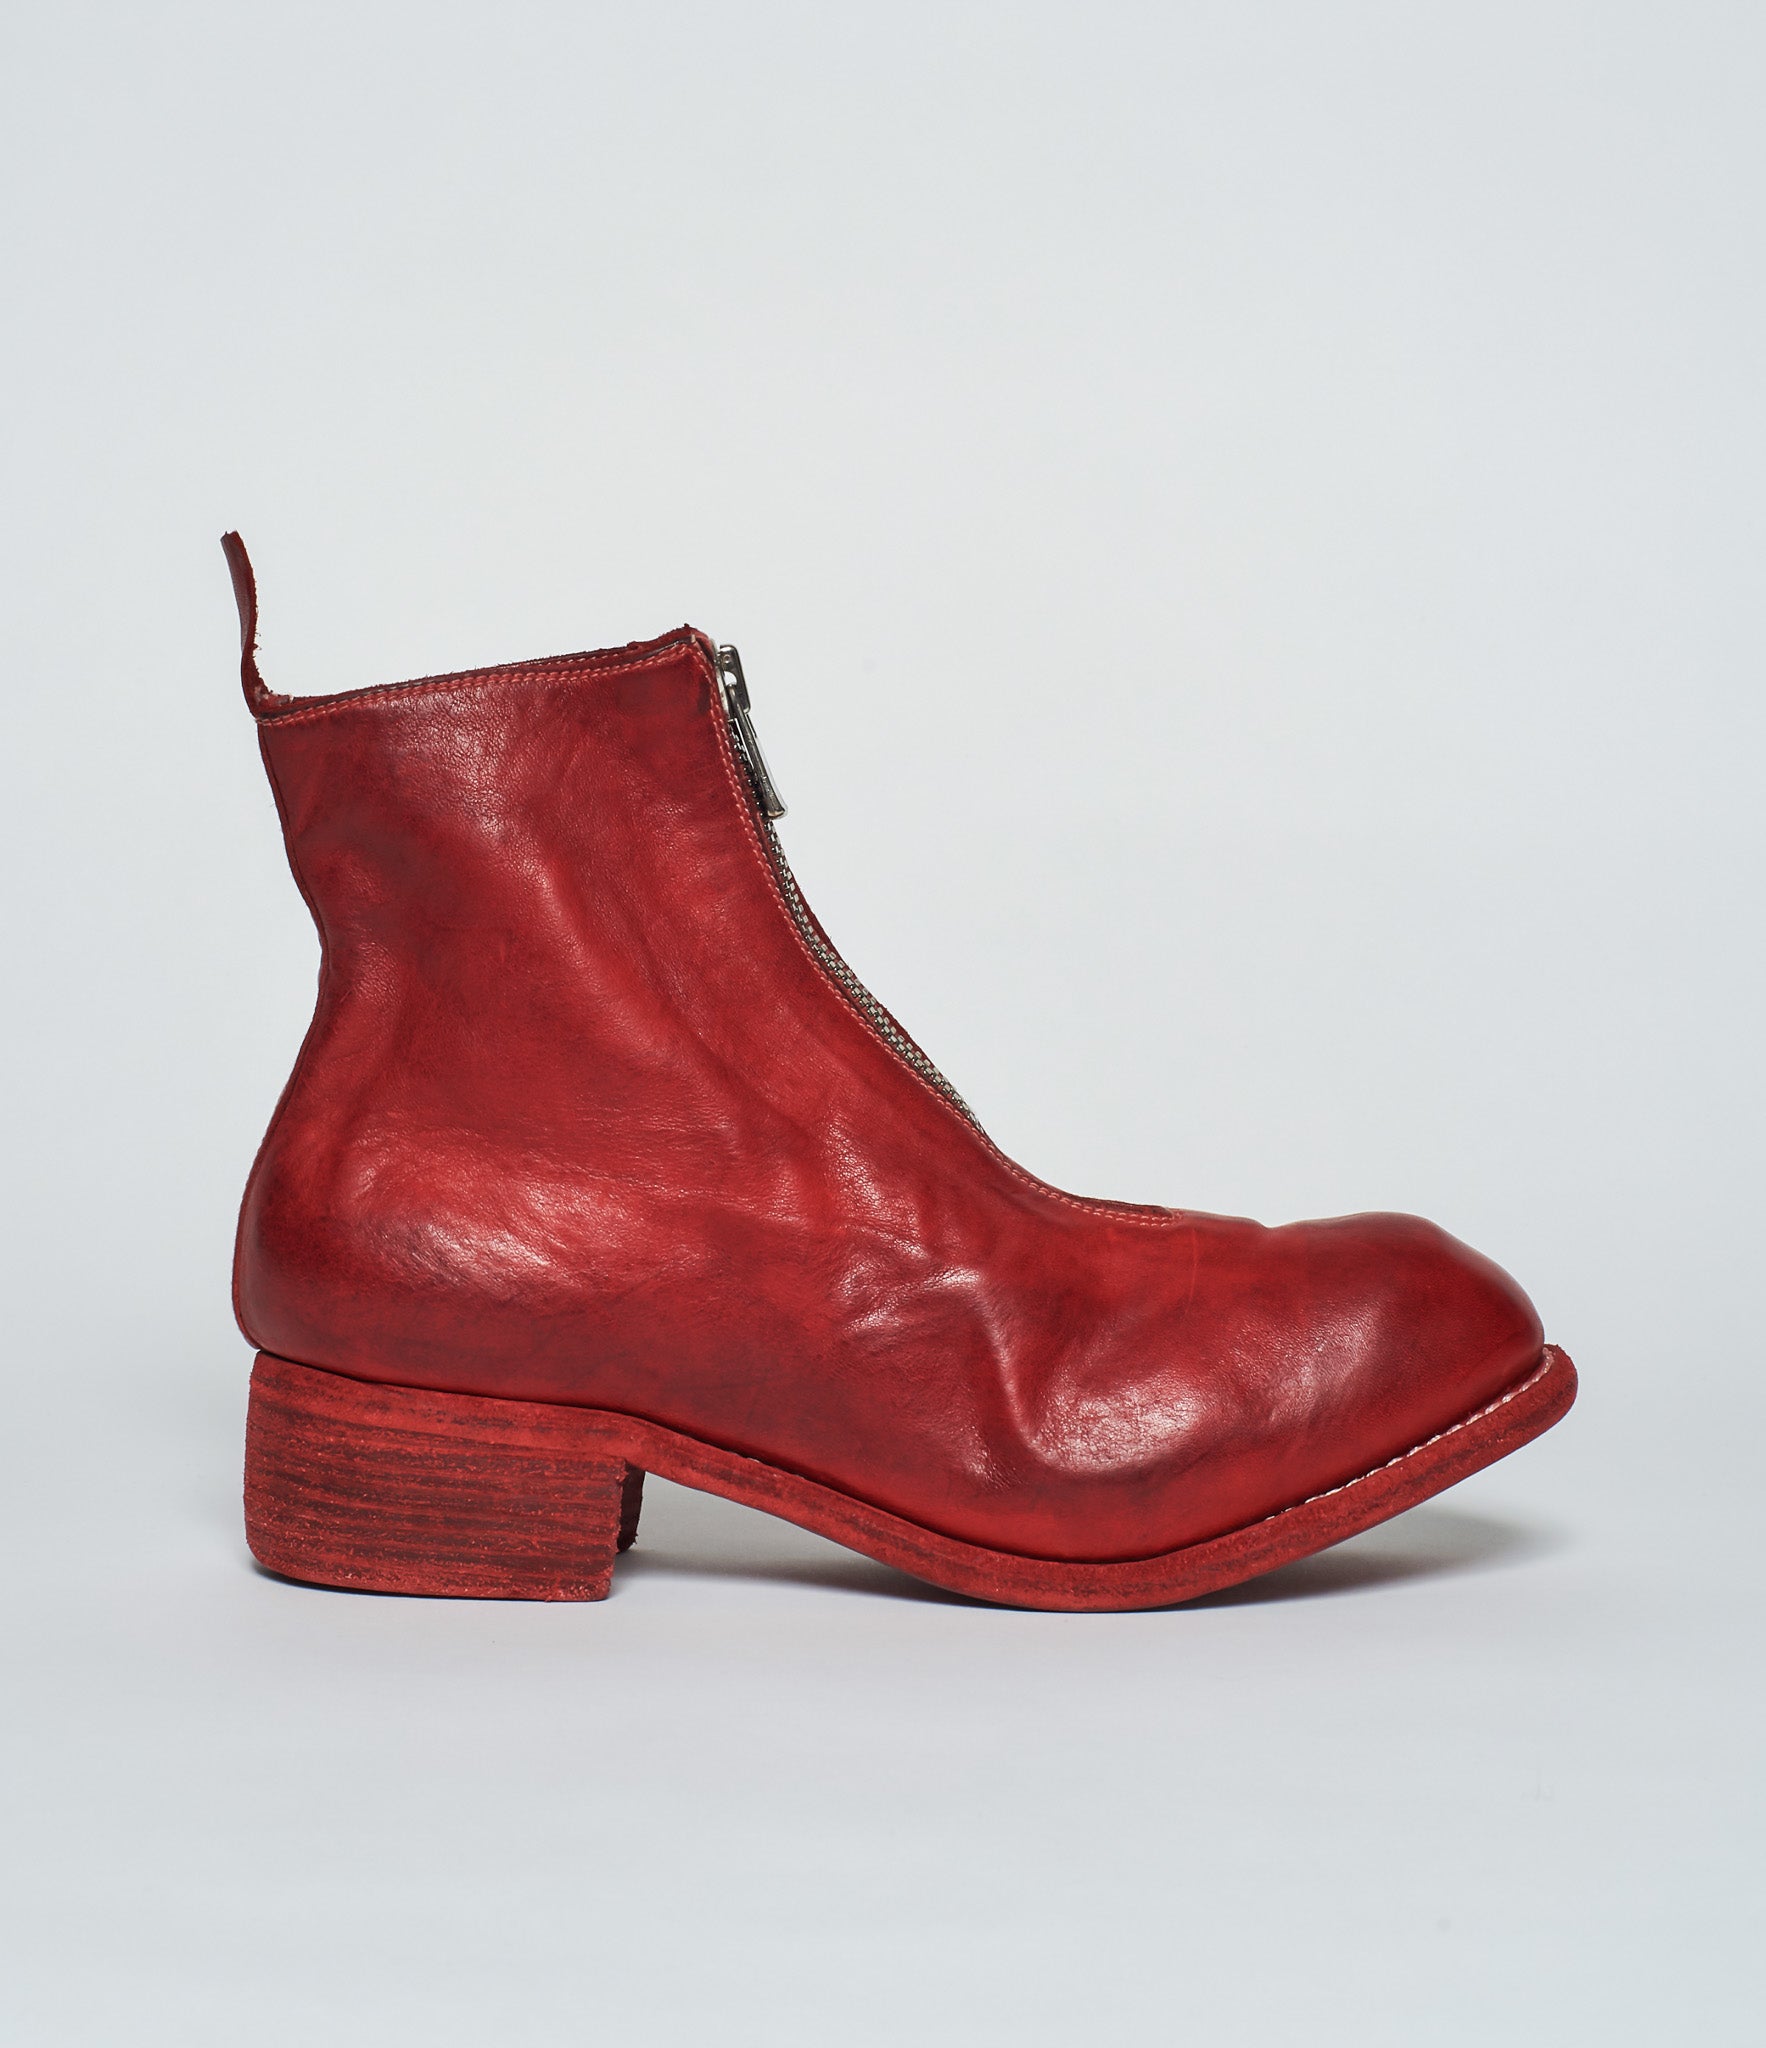 ankle boots red leather